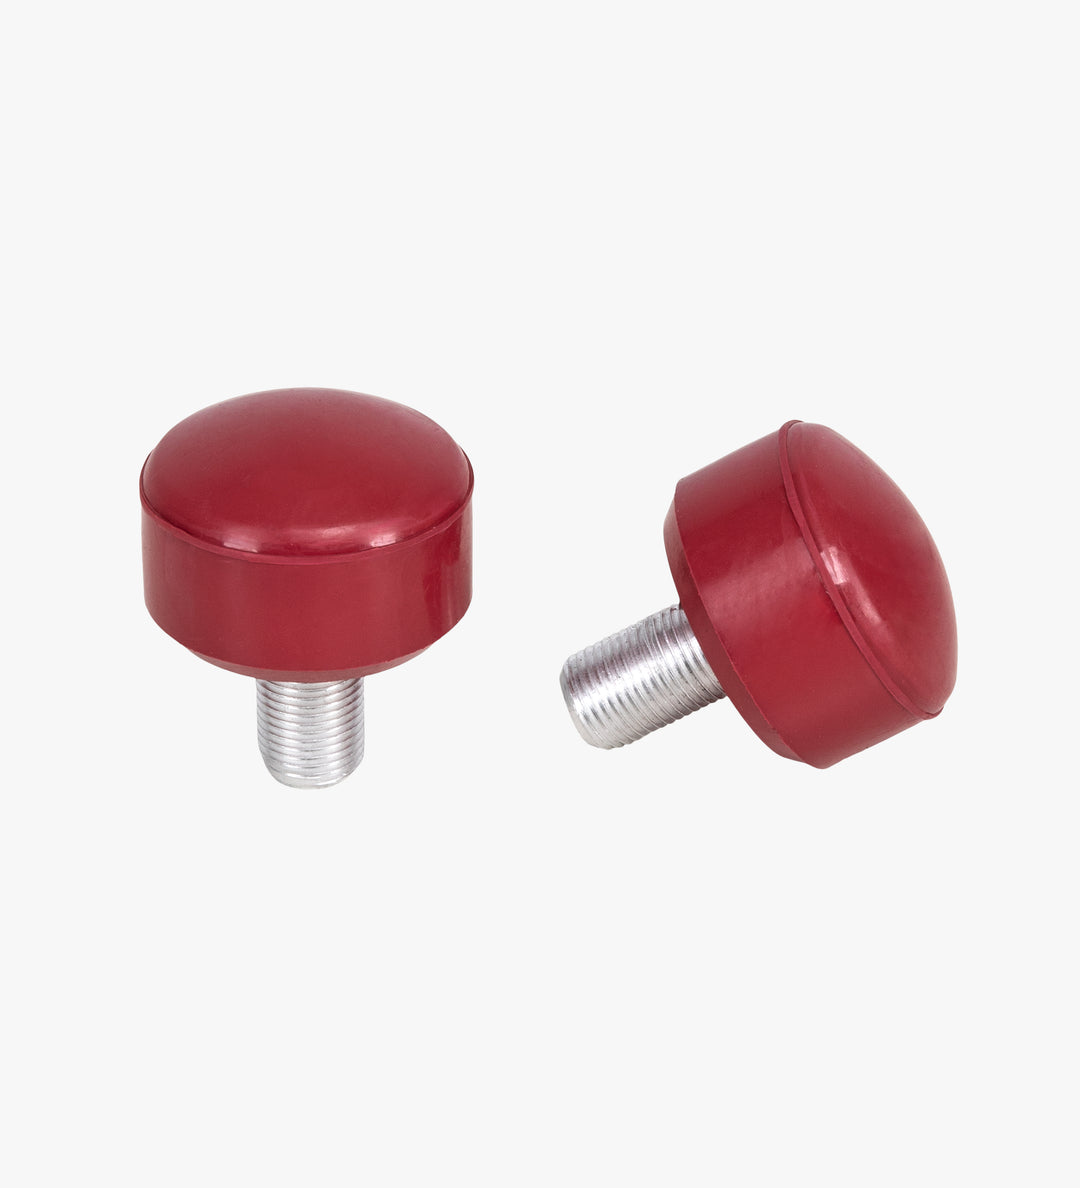 Roller Skate Wheels and Stoppers Combo - Red